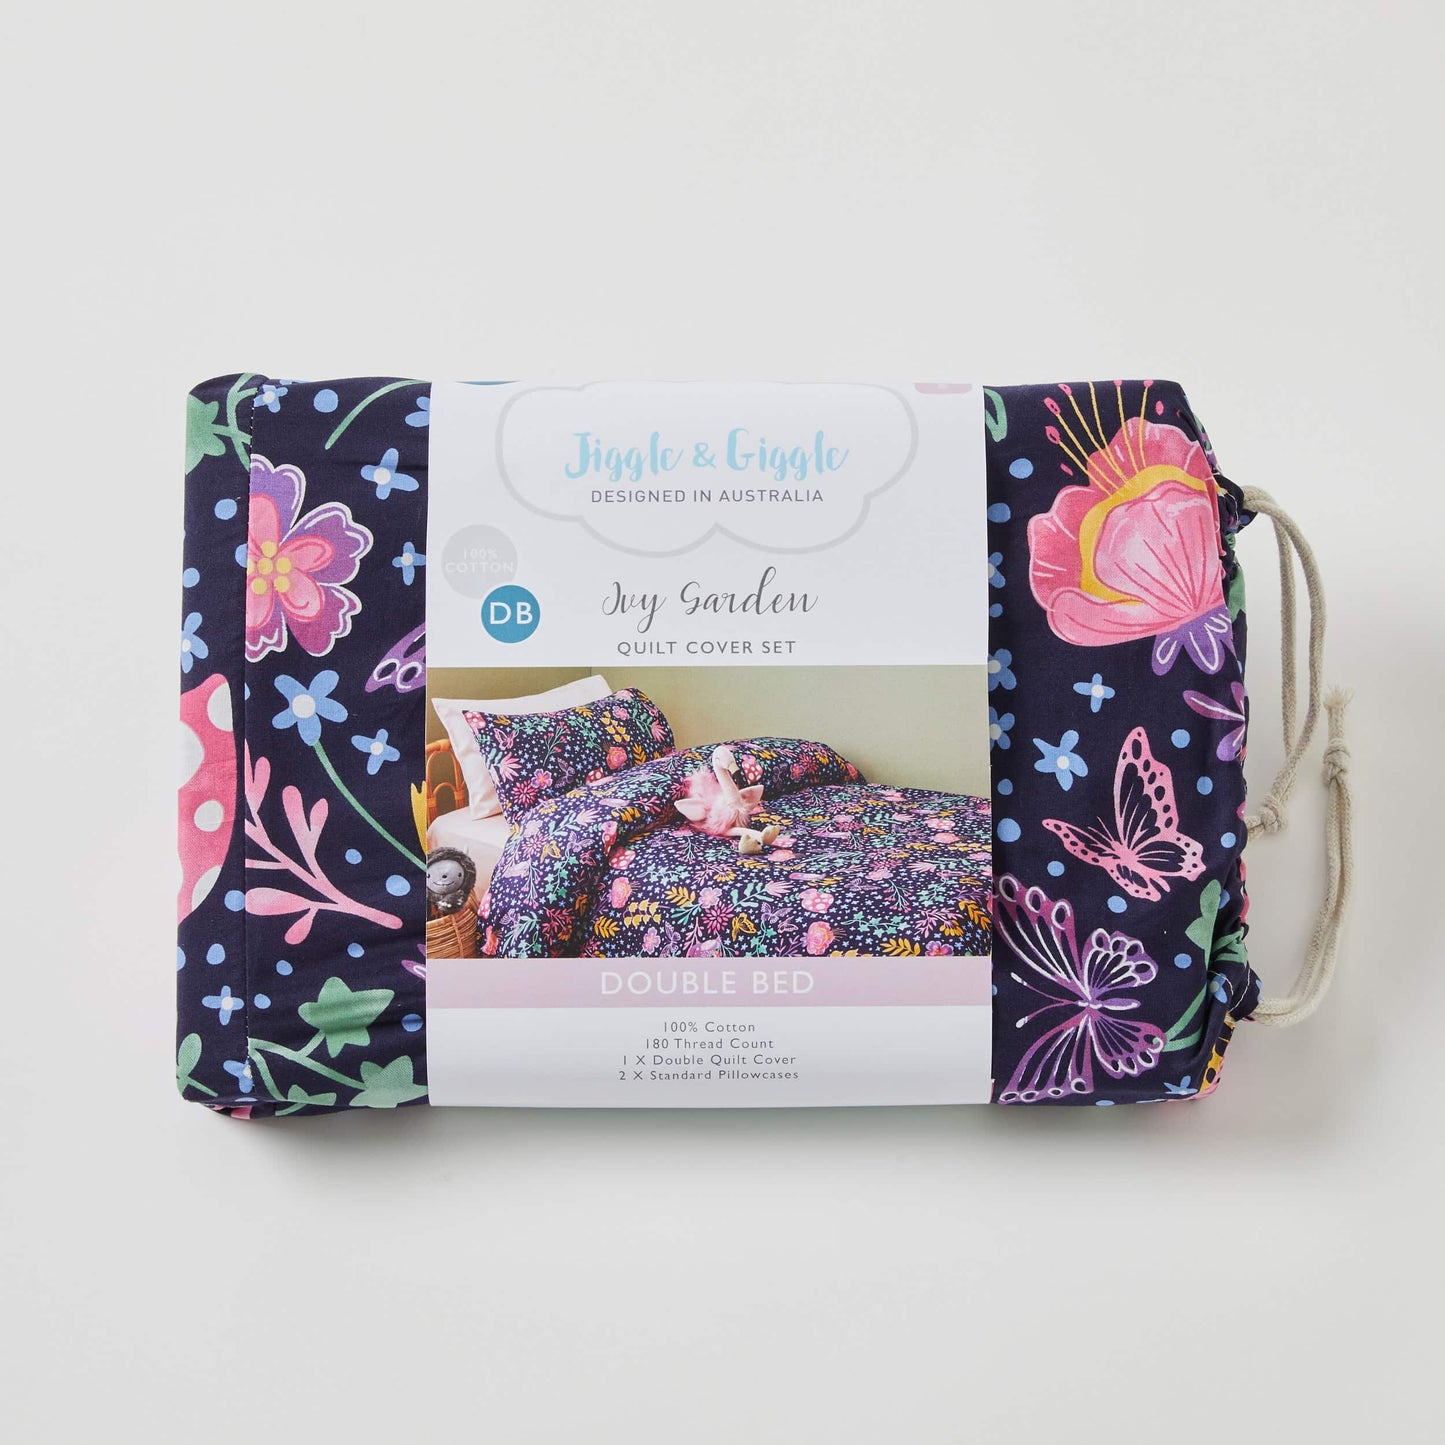 Jiggle & Giggle Ivy Garden Quilt Cover